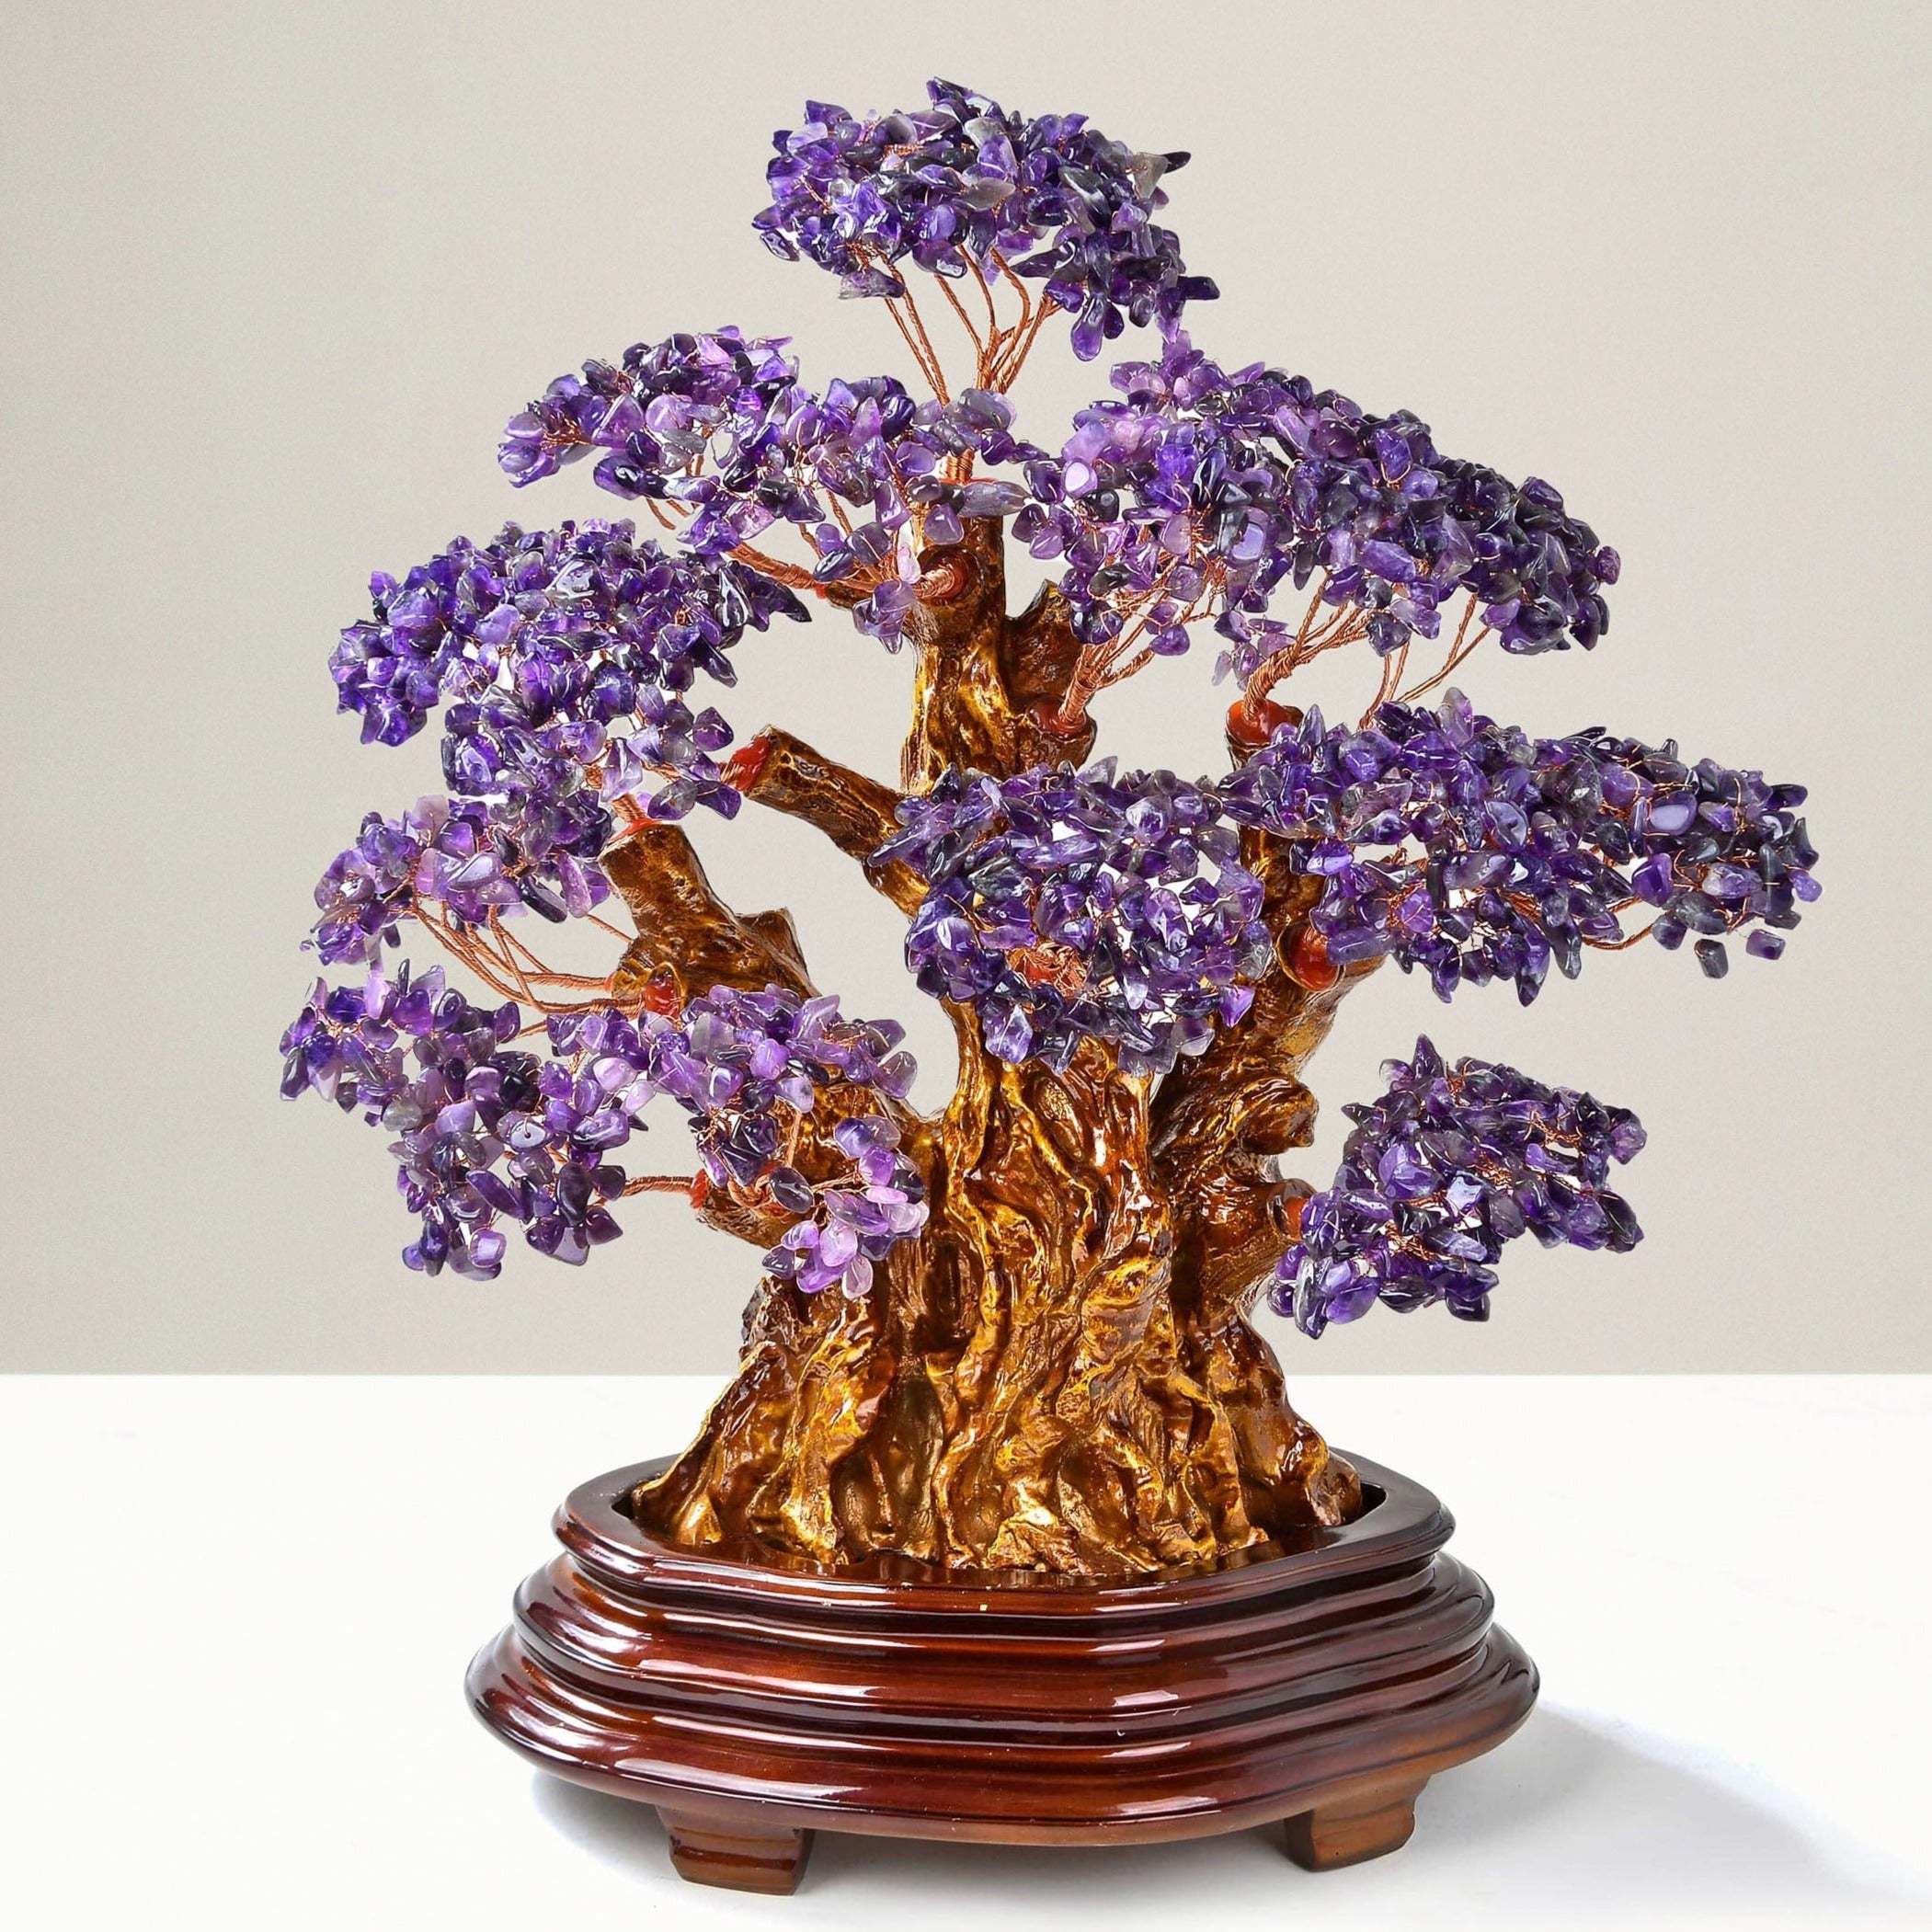 Kalifano Gemstone Trees Amethyst Tree of Life Centerpiece with over 2,000 Natural Gemstones K9800-AM